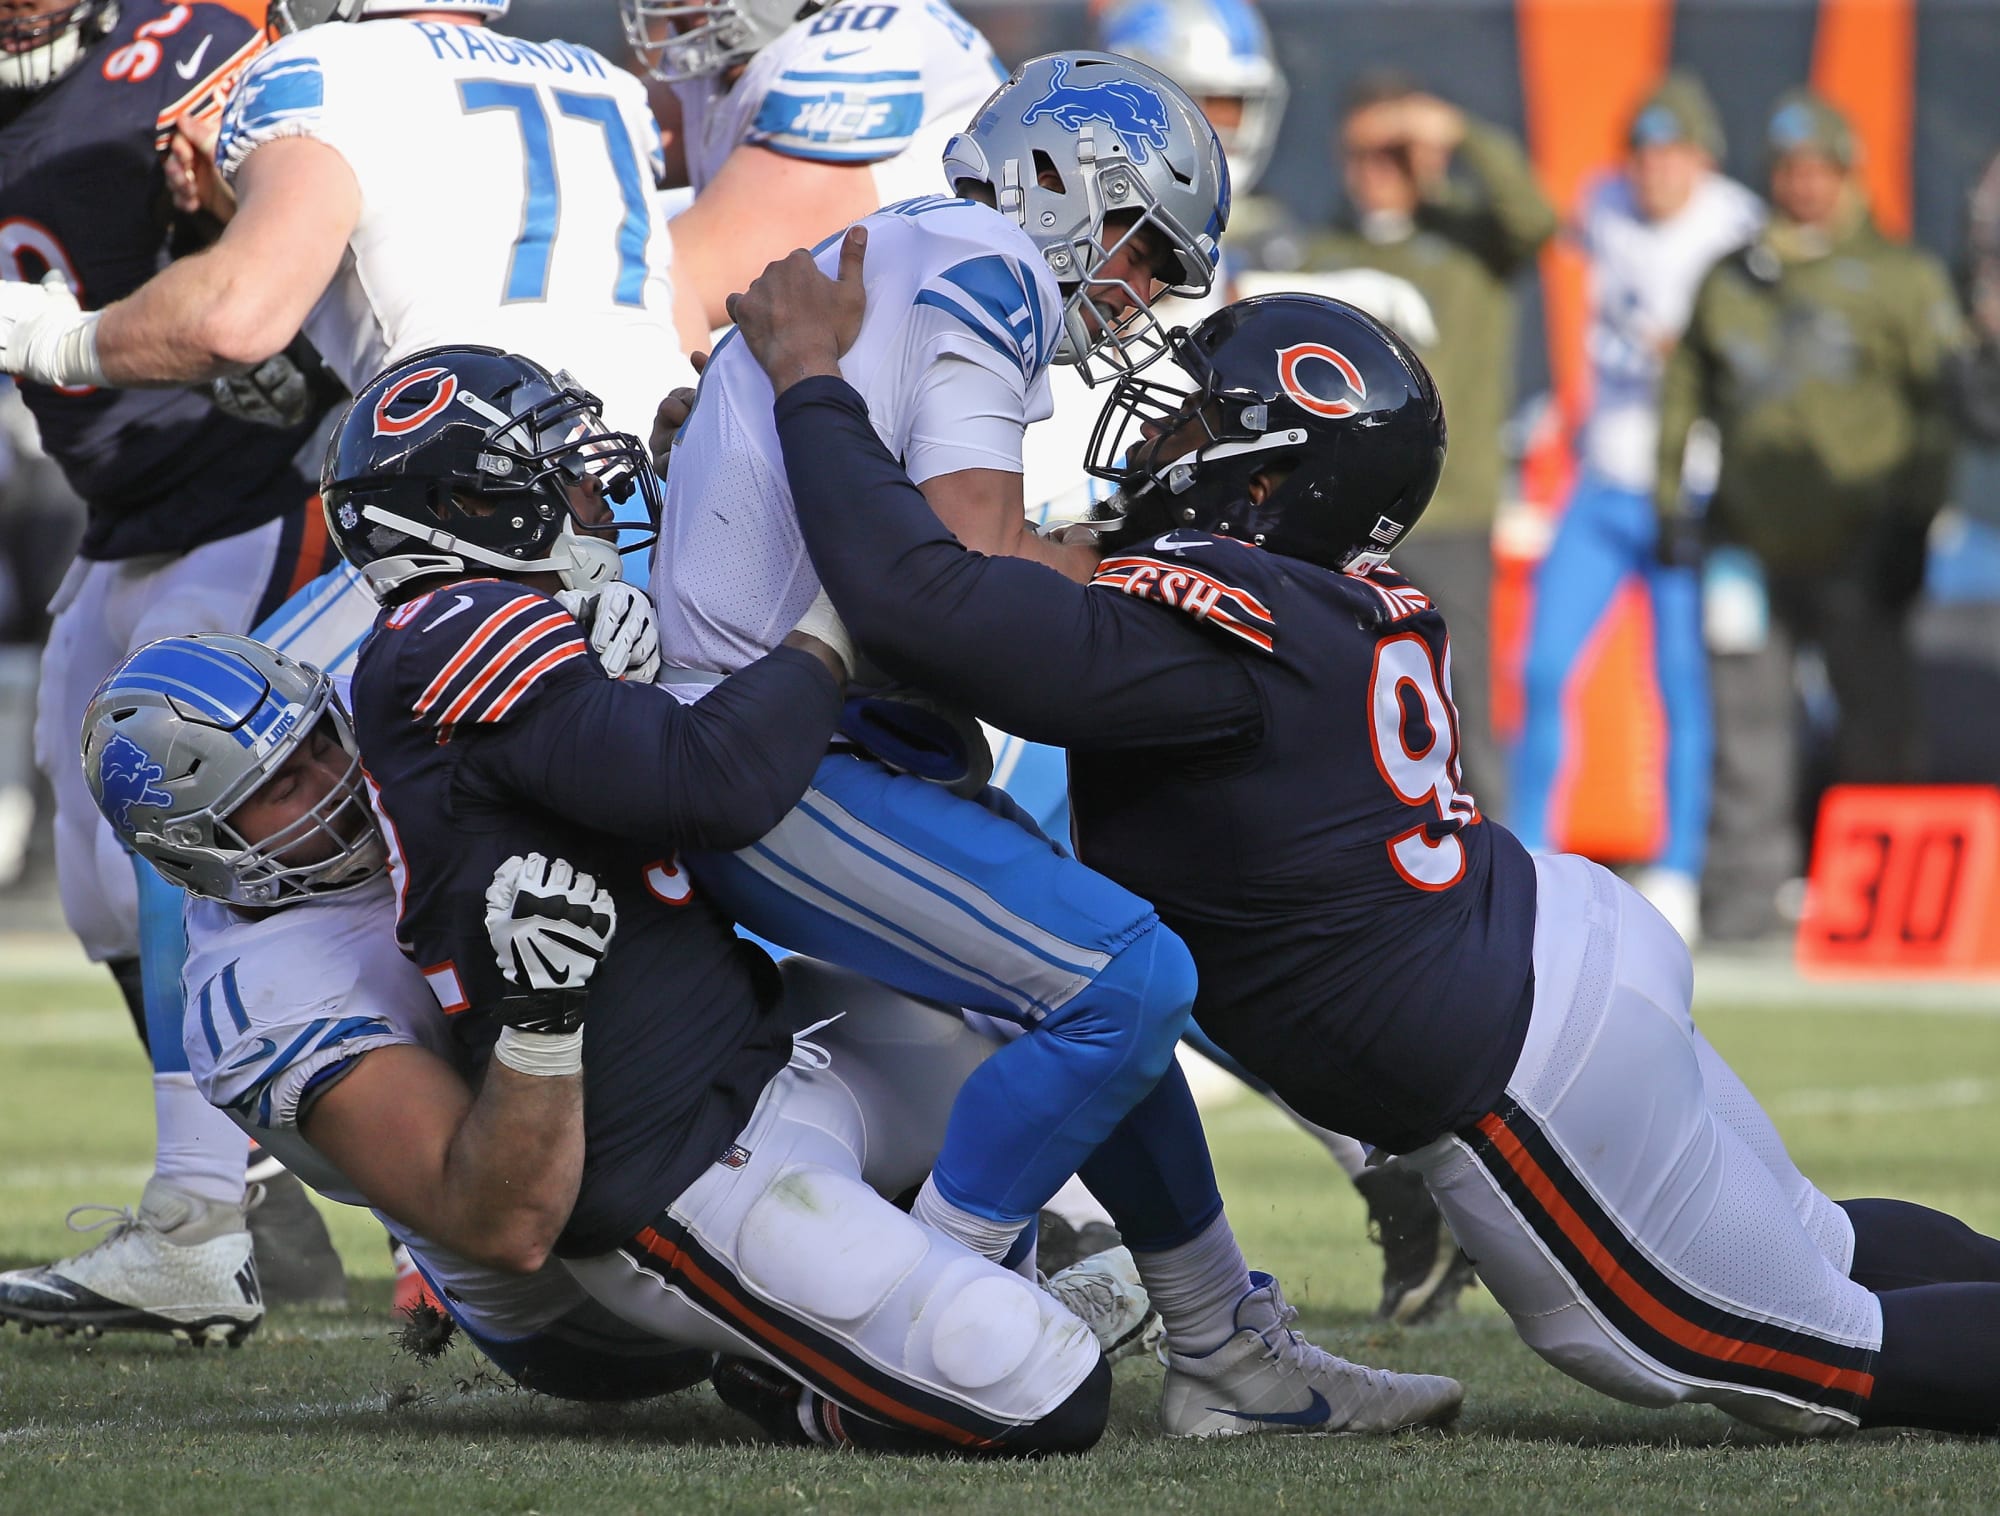 Chicago Bears missed the mark in ranking of defensive triplets